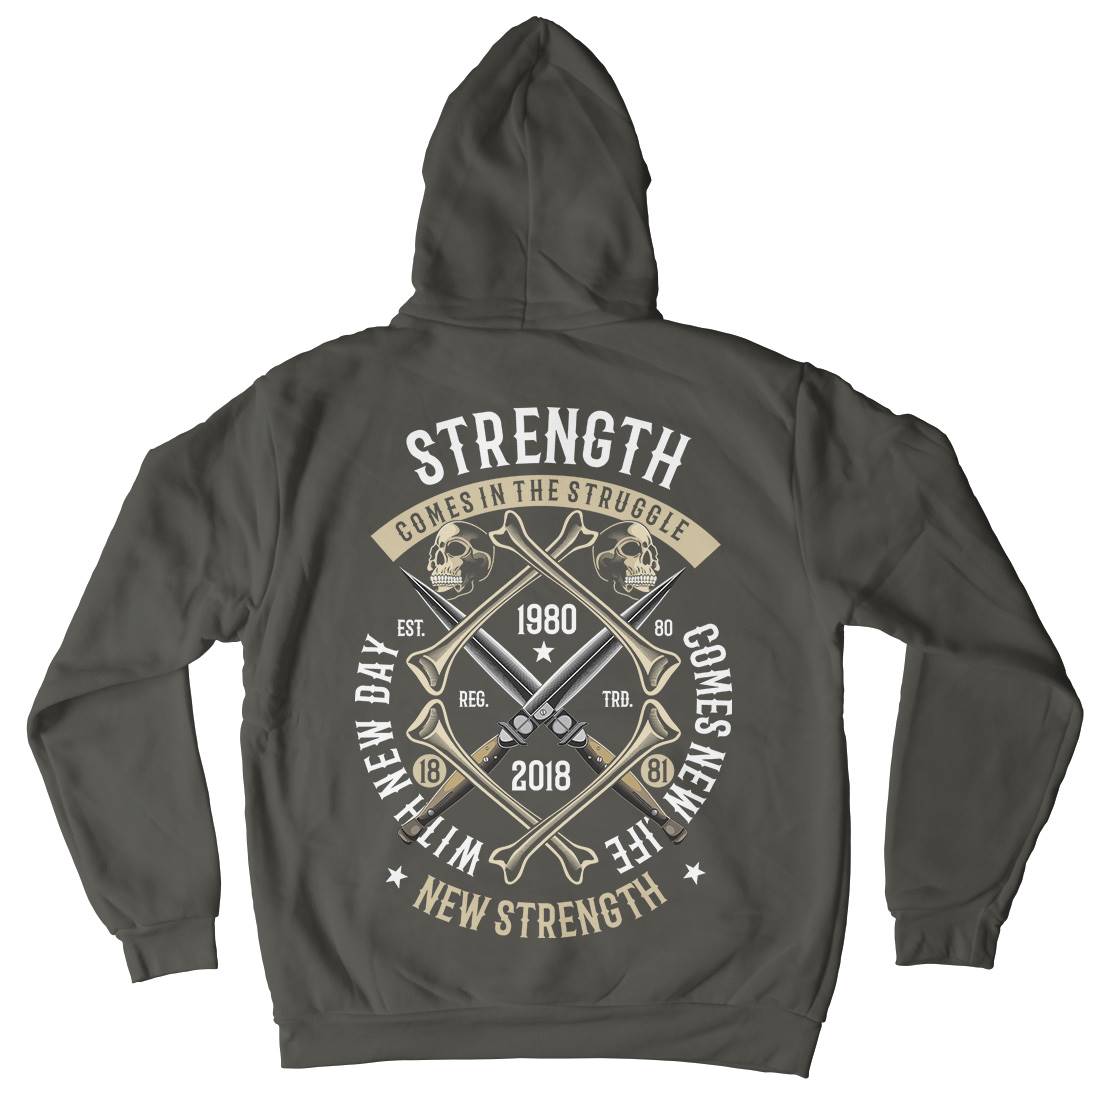 Strength Mens Hoodie With Pocket Army C454